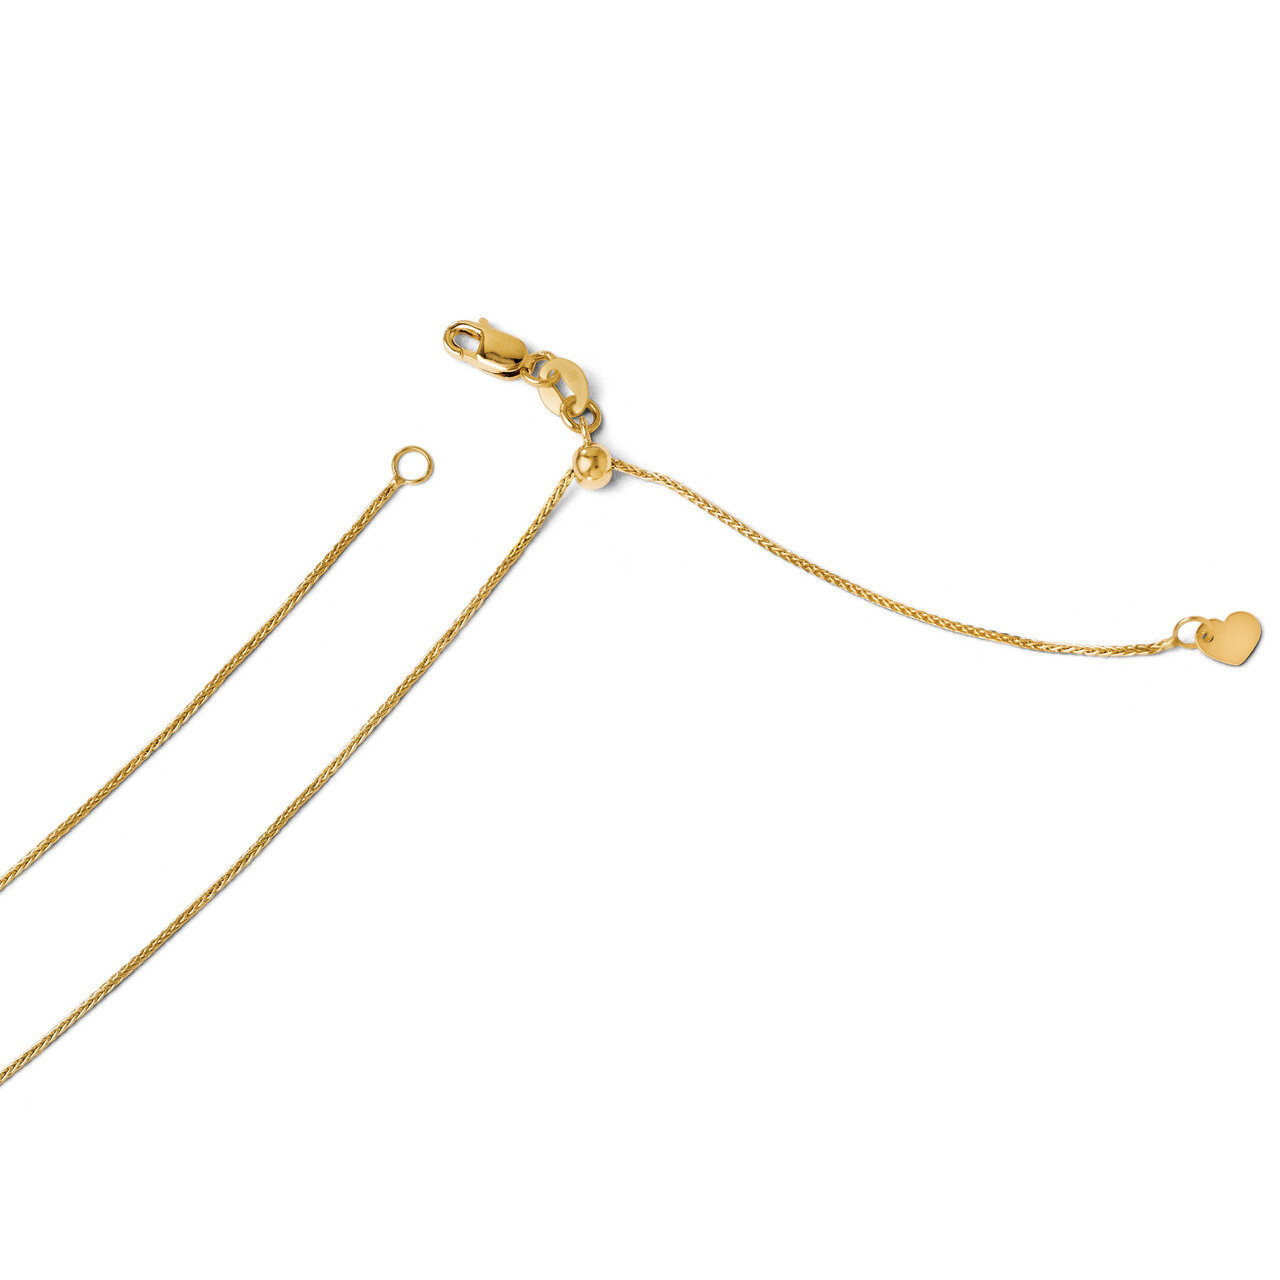 Adjustable .85mm Wheat Chain 22 Inch - 14k Gold HB-1224-22